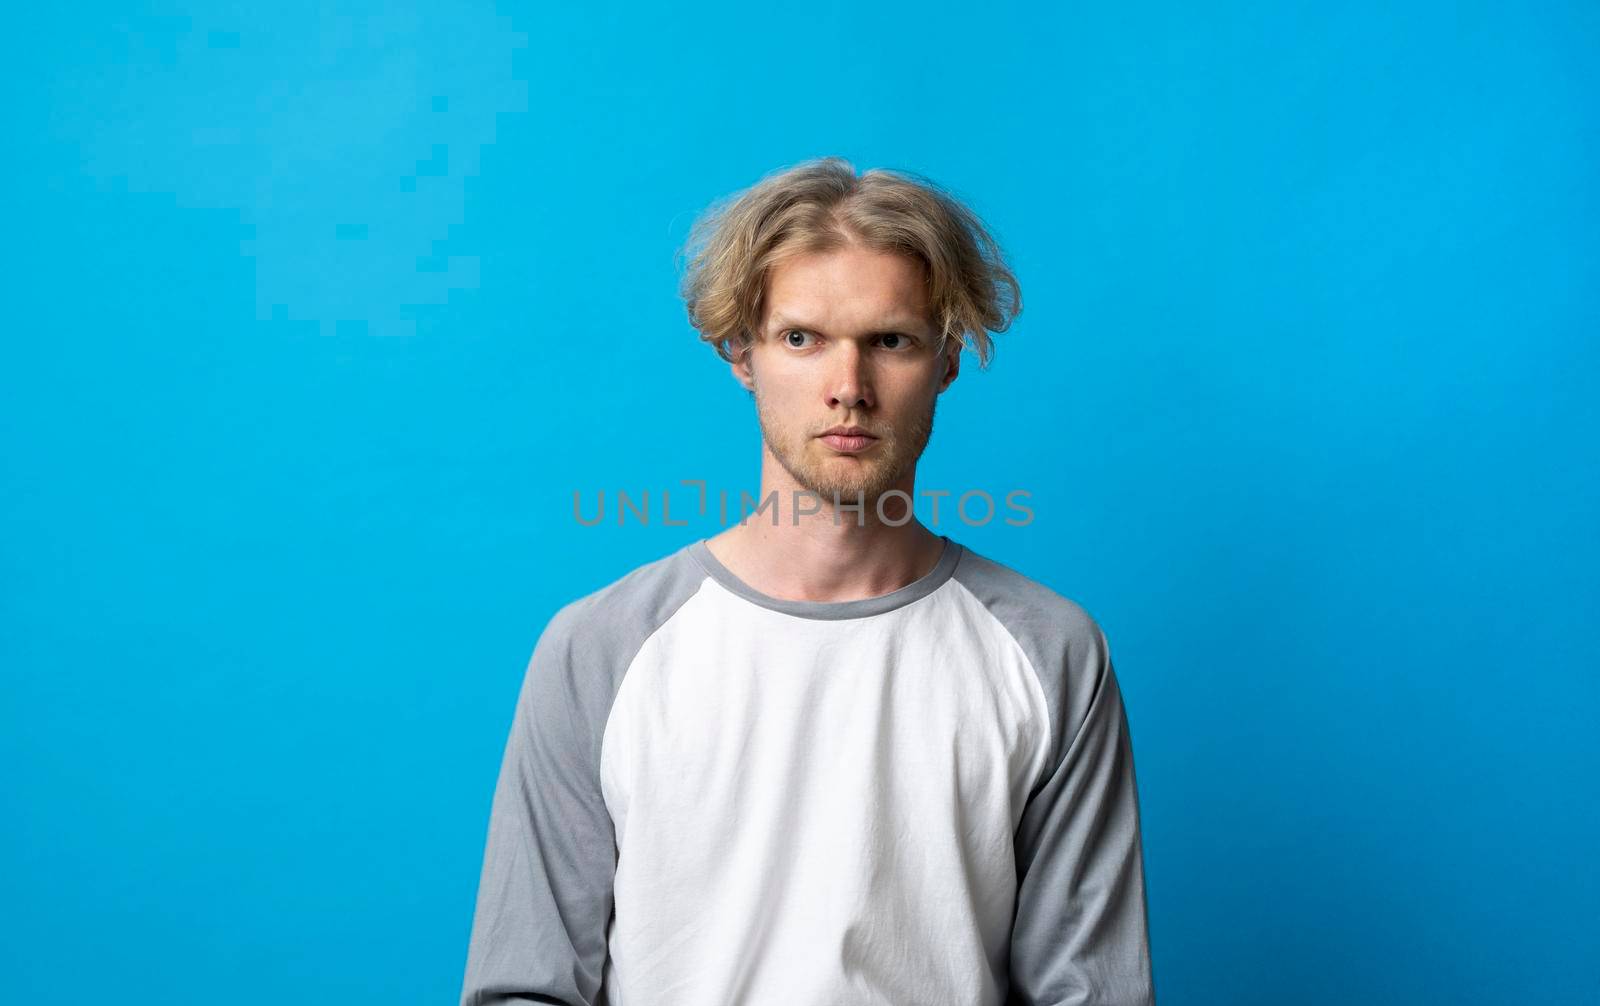 Man with long hair frowning her face in displeasure, wearing yellow t-shirt. Attractive young man in angry posture. Negative human emotions facial expression feelings attitude